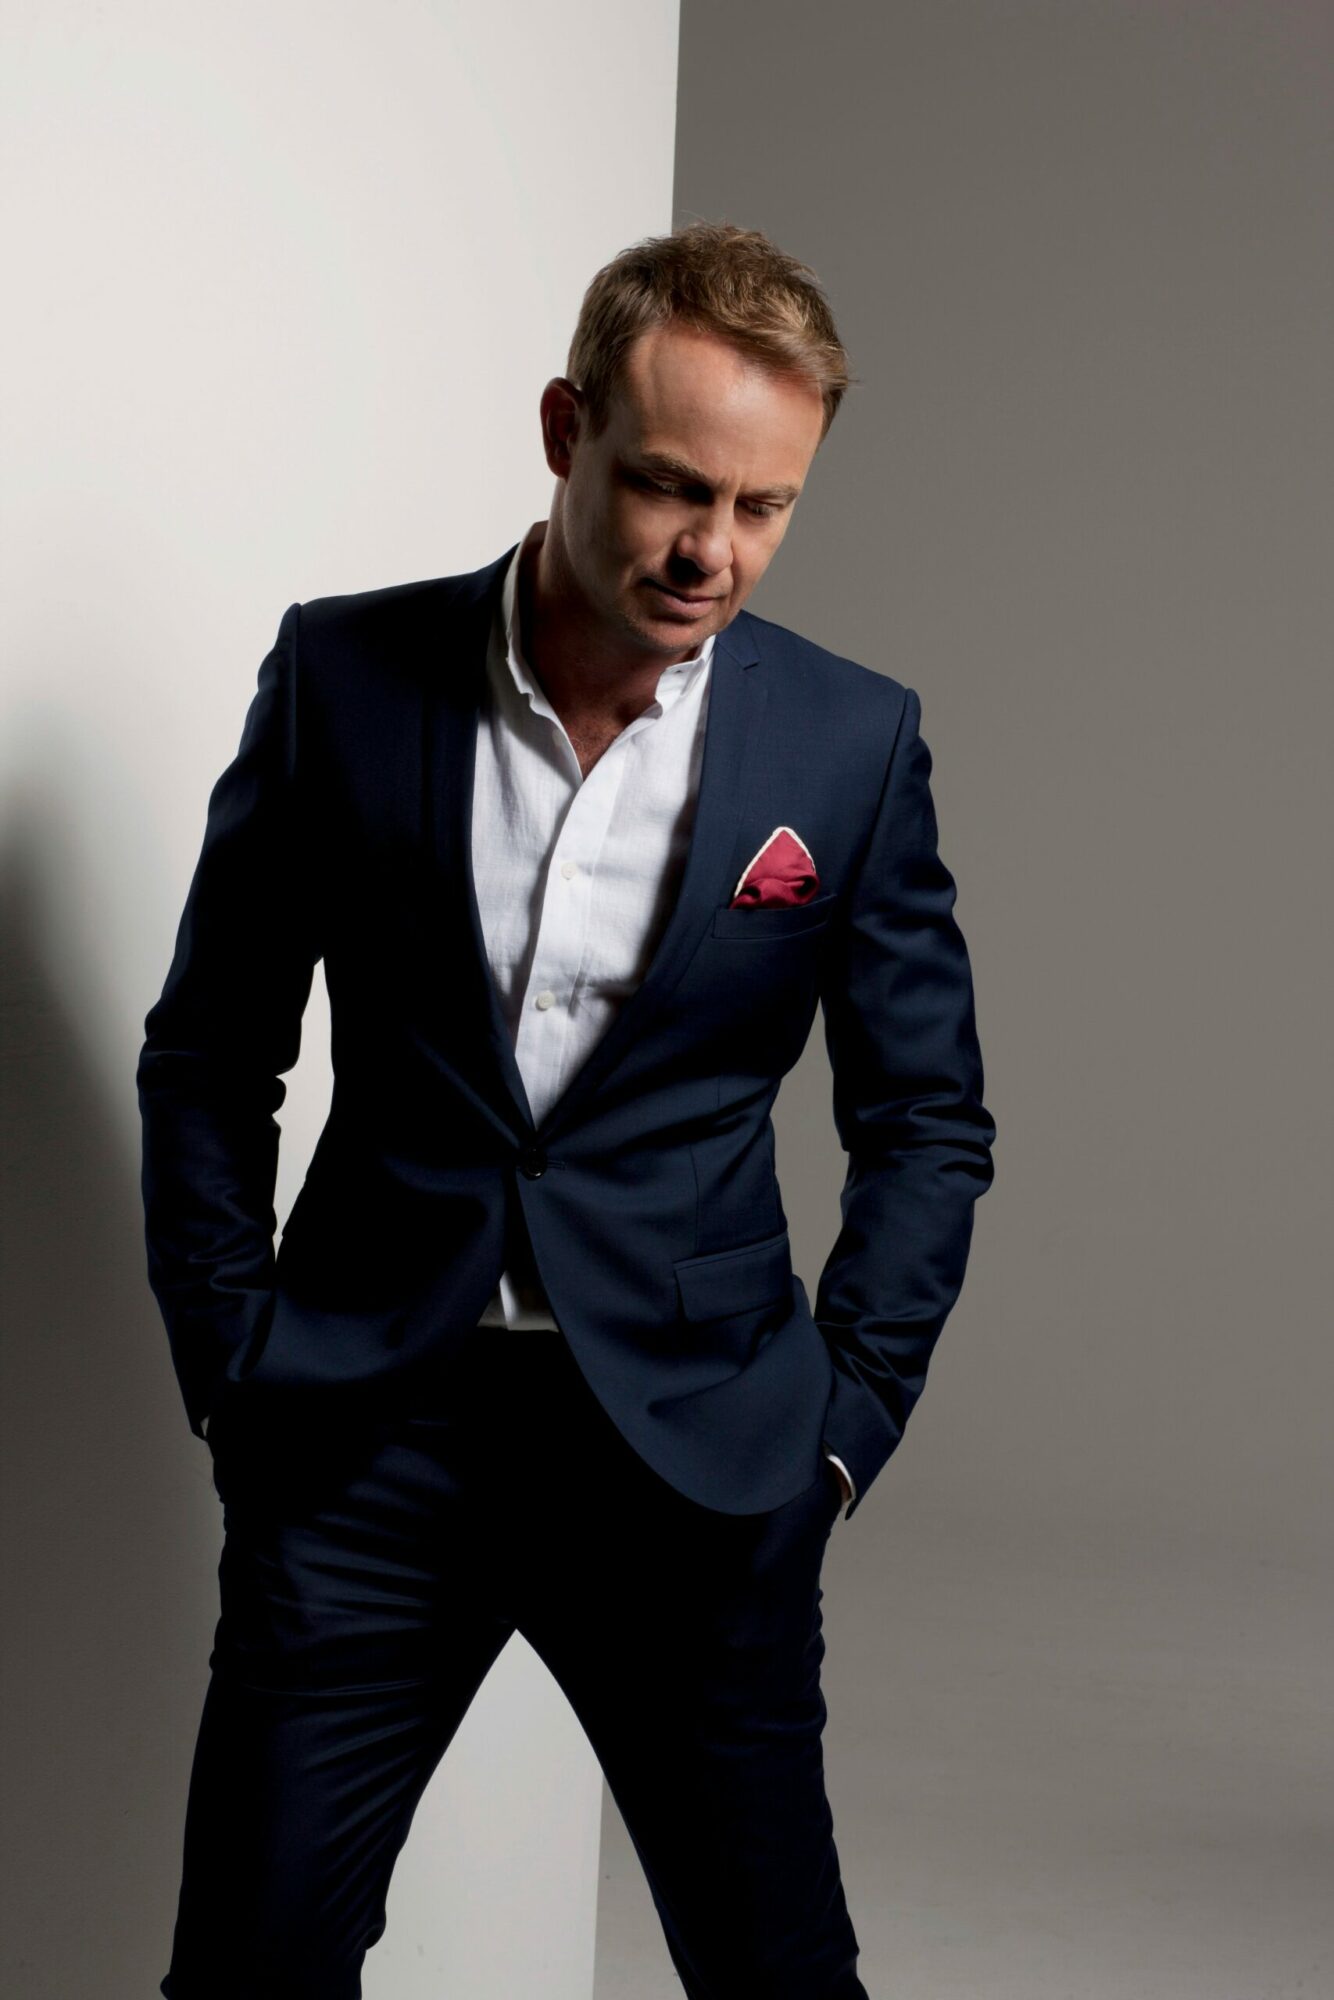 Image name Jason Donovan DOIN FINE 25 at York Barbican York scaled the 33 image from the post Jason Donovan - DOIN' FINE 25 at York Barbican, York in Yorkshire.com.